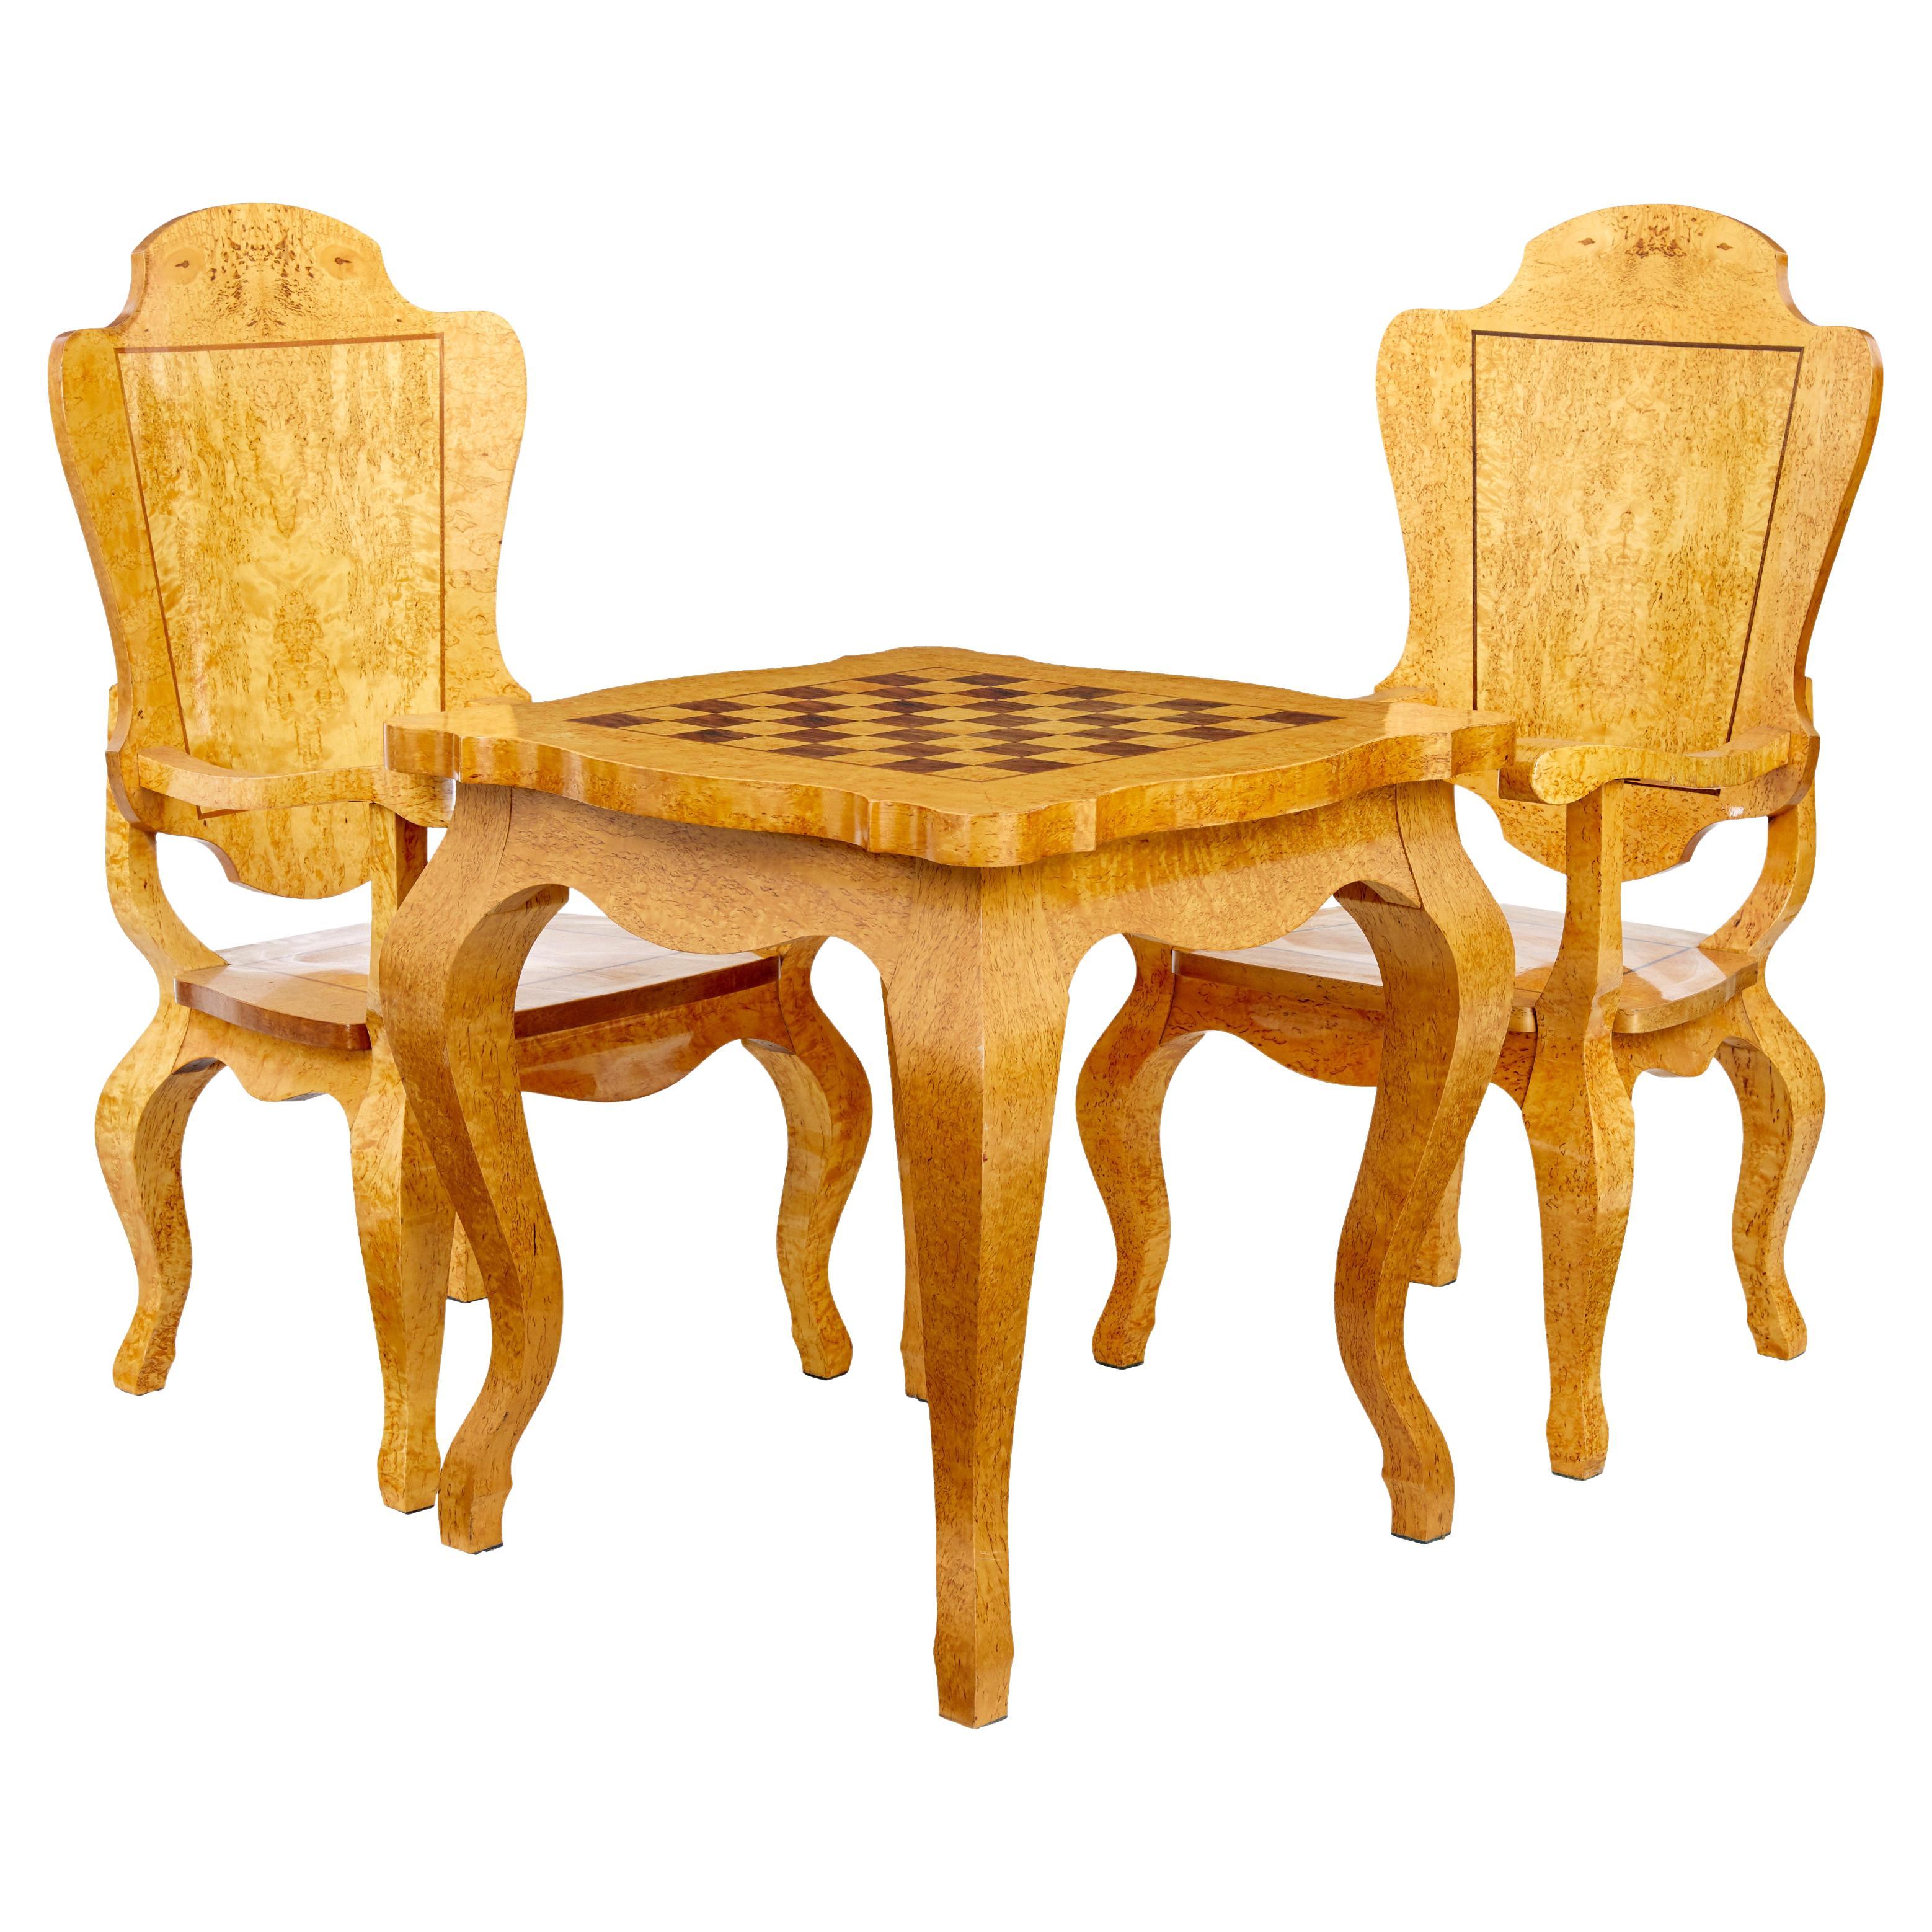 3 piece 20th century burr birch games table and armchairs For Sale